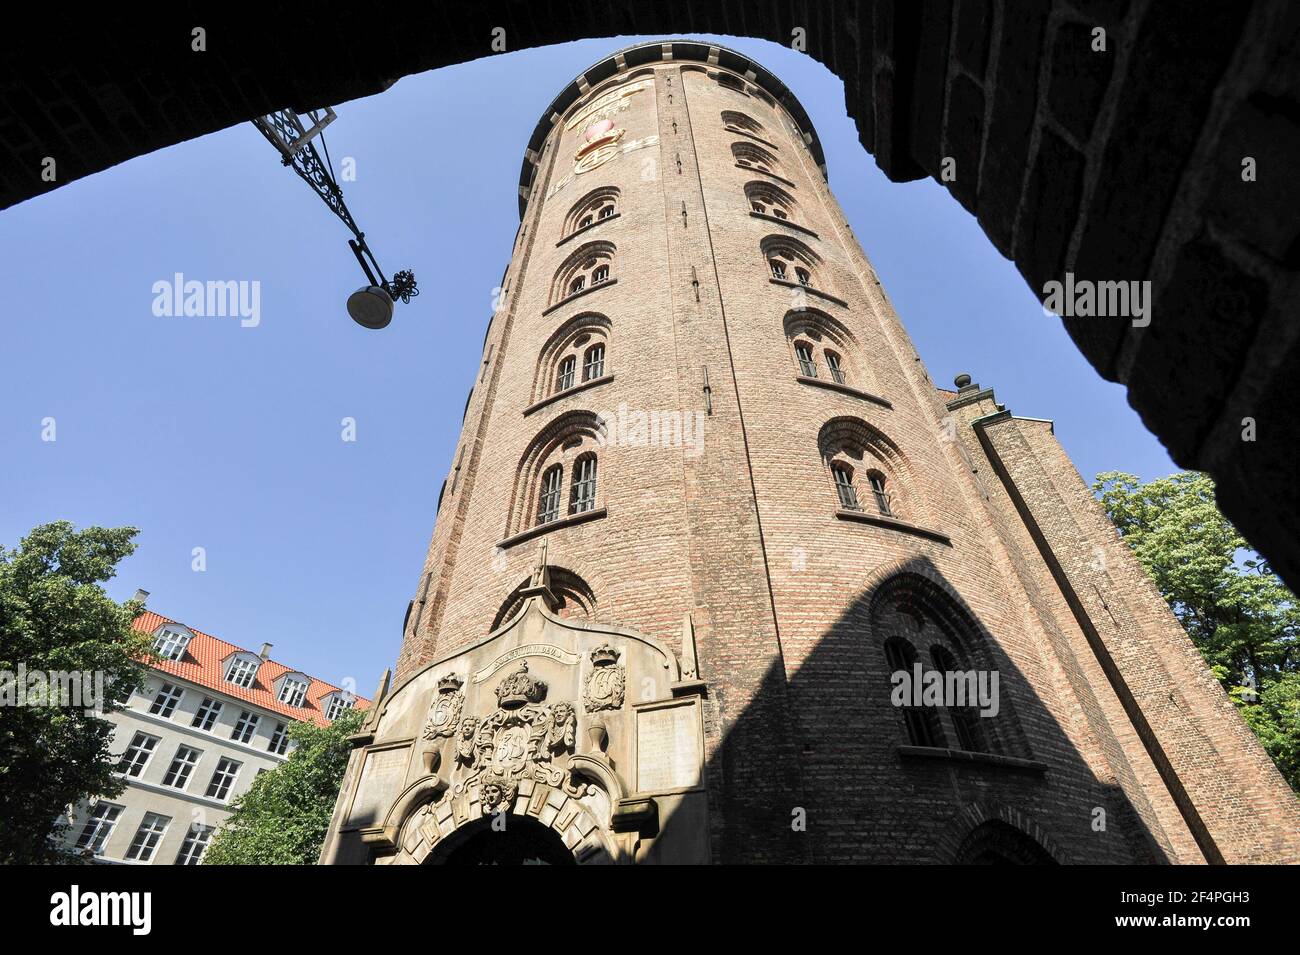 Baroque Rundetarn (Round Tower) 1637 1642 bulit by Hans van Steenwinckel the Younger for king Christian IV of Denmark as a astronomical observatory, w Stock Photo